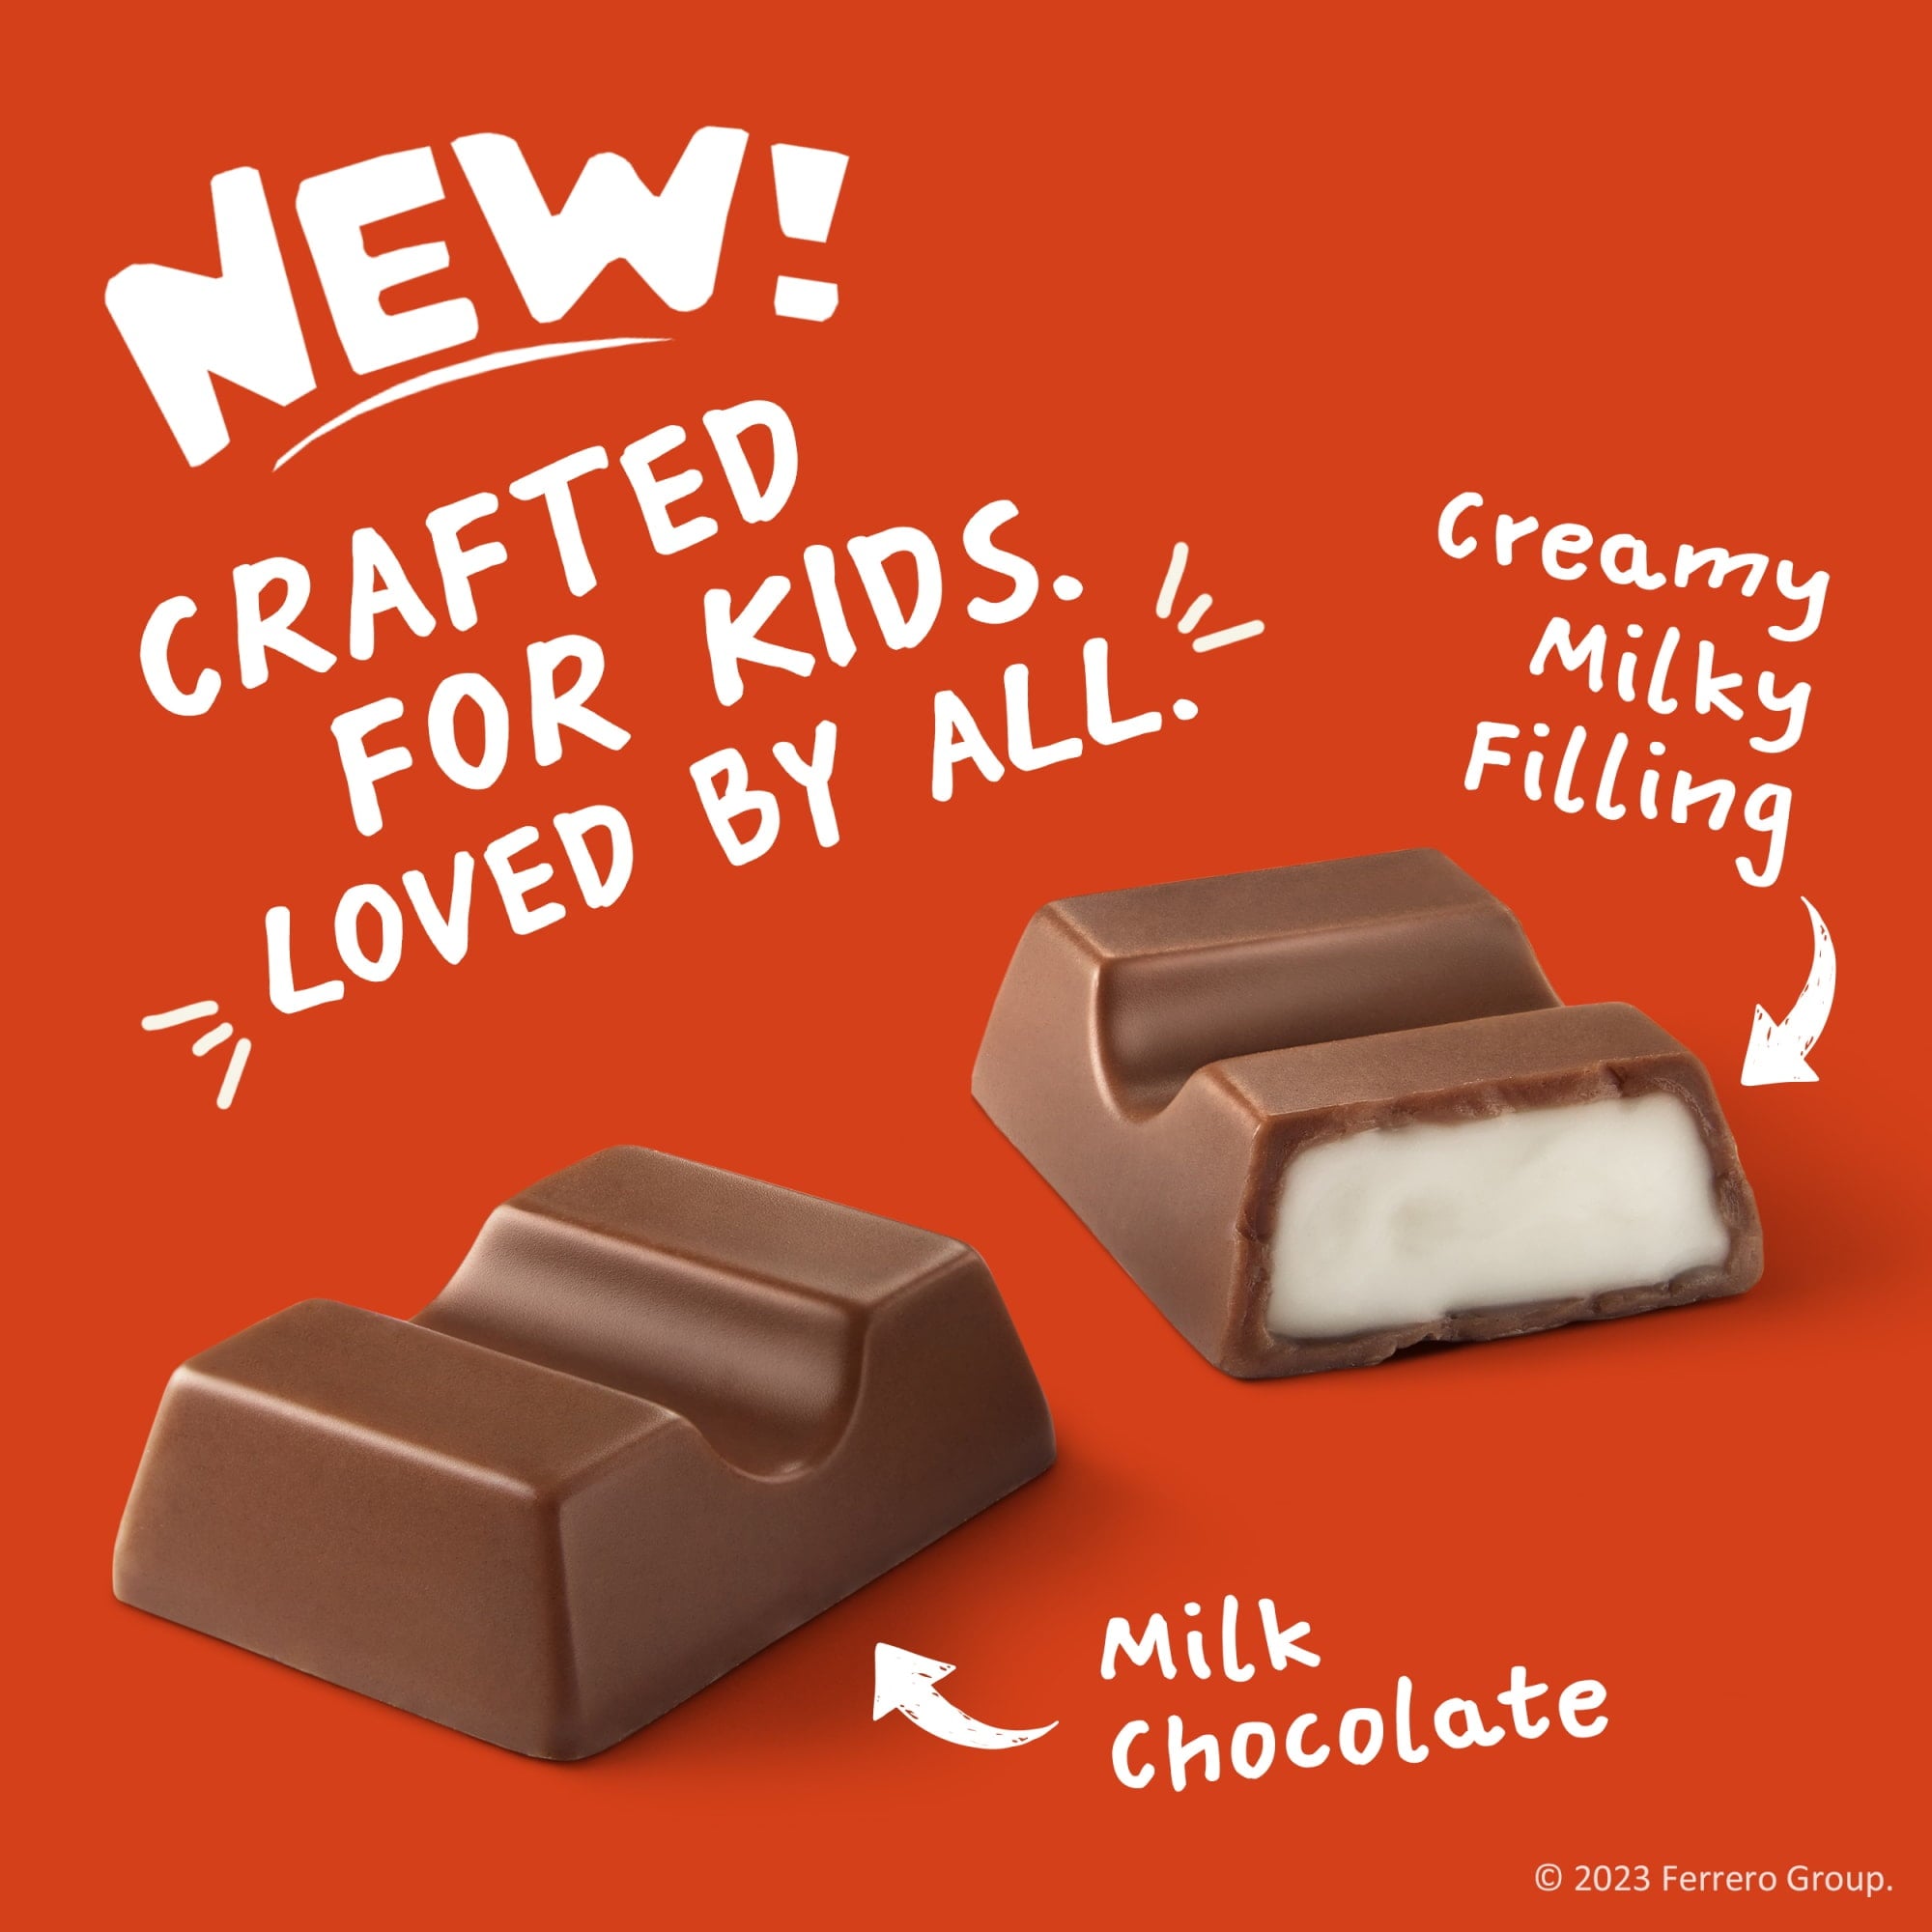 Wholesale prices with free shipping all over United States Kinder Chocolate Mini, Milk Chocolate Bar With Creamy Milky Filling, 7.2 Oz Share Pack - Steven Deals